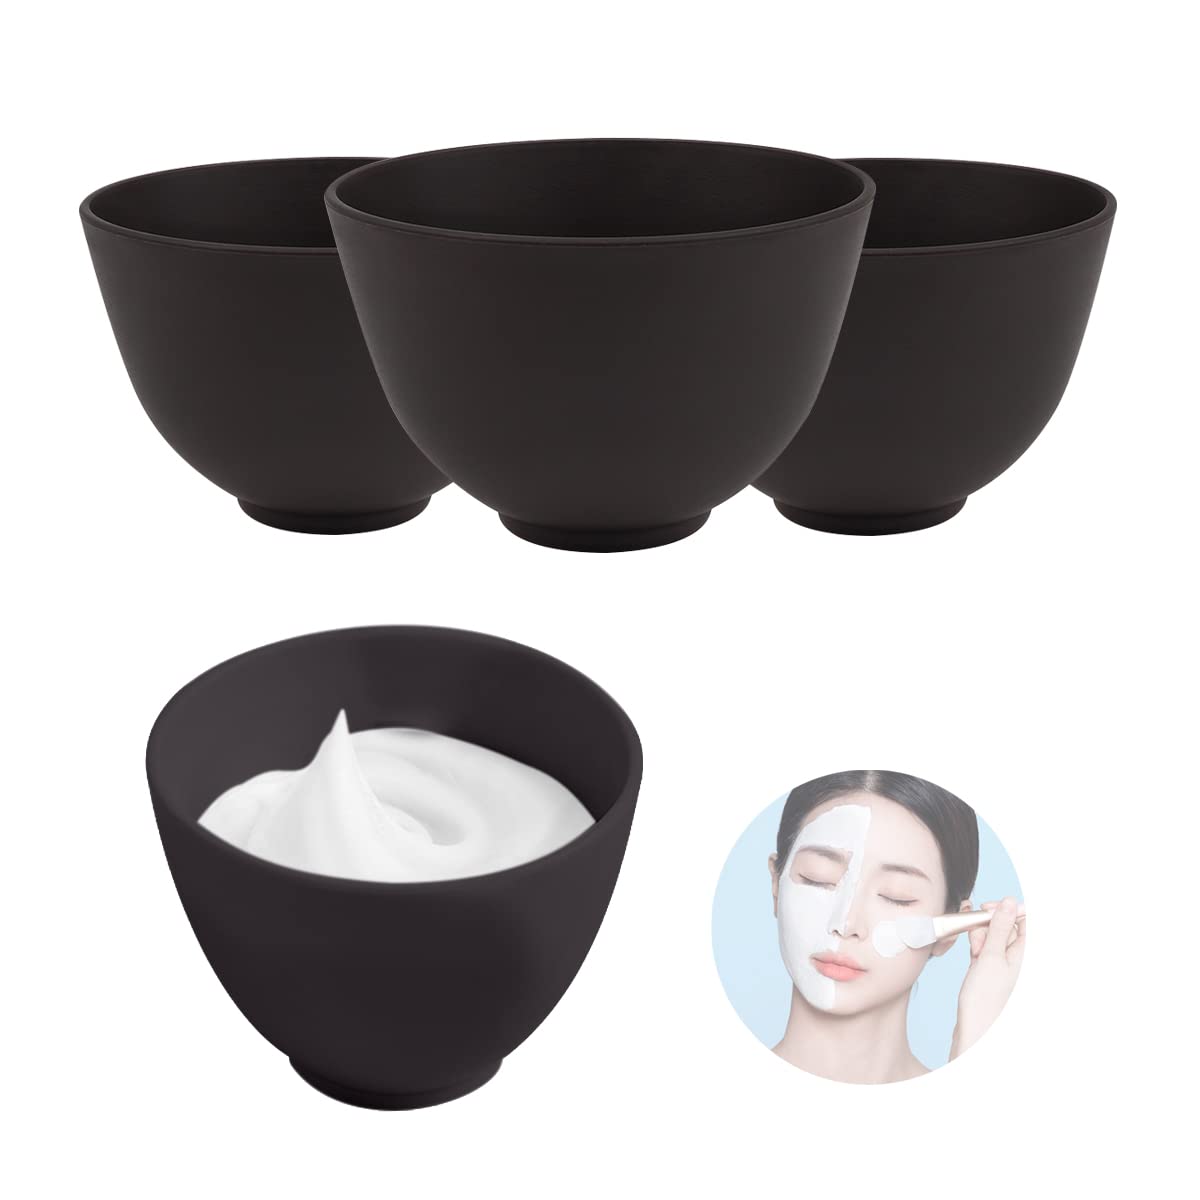 FERCAISH 4Pcs Diy Face Mask Mixing Bowl, Microwavable Silicone Facial Mud Bowl Cosmetic Beauty Tool for Home Salon(Black)